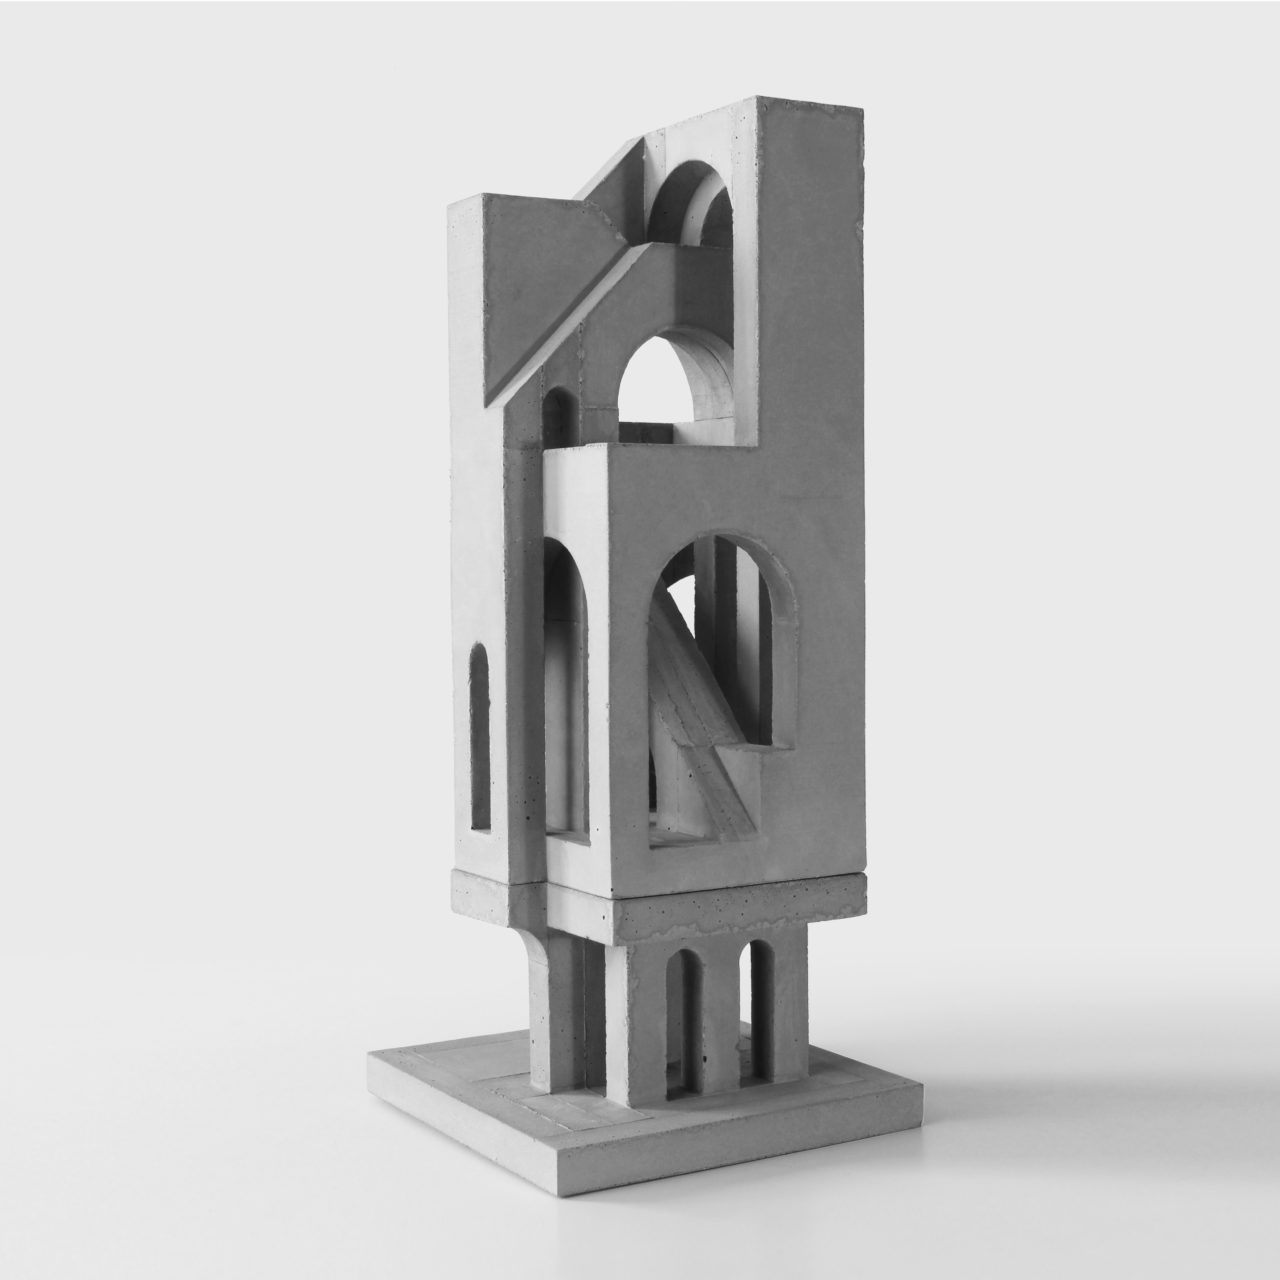 image of a medium sized architectural sculpture